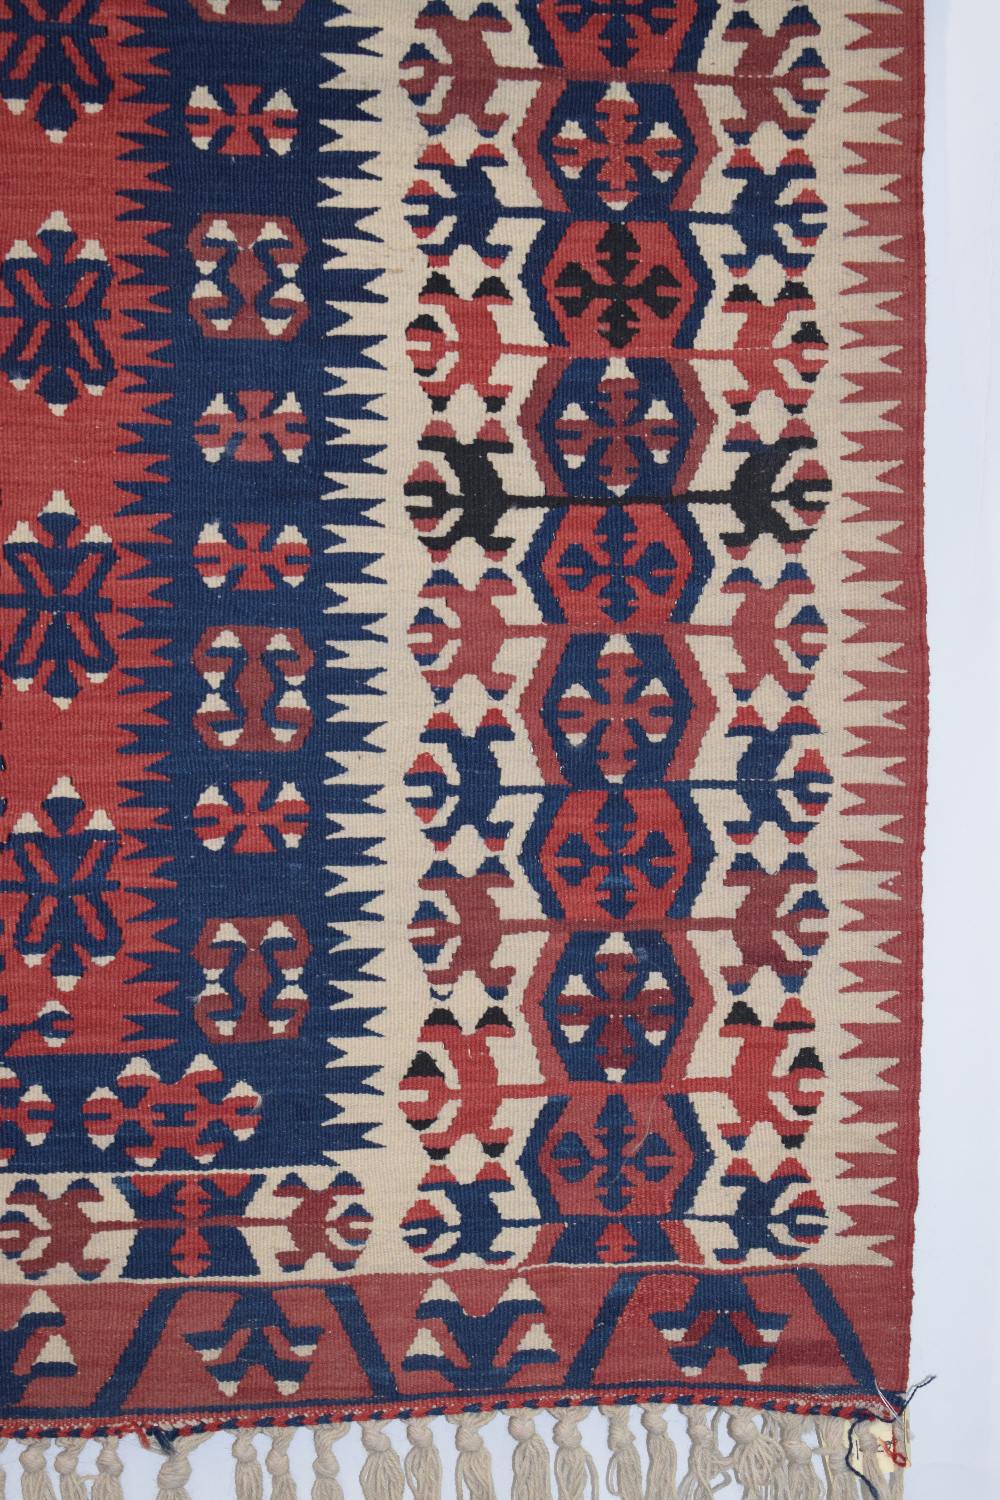 Two Anatolian rugs, the first: Konya kelim, central Anatolia, circa 1940s-50s, 4ft. 11in. X 3ft. - Image 2 of 17